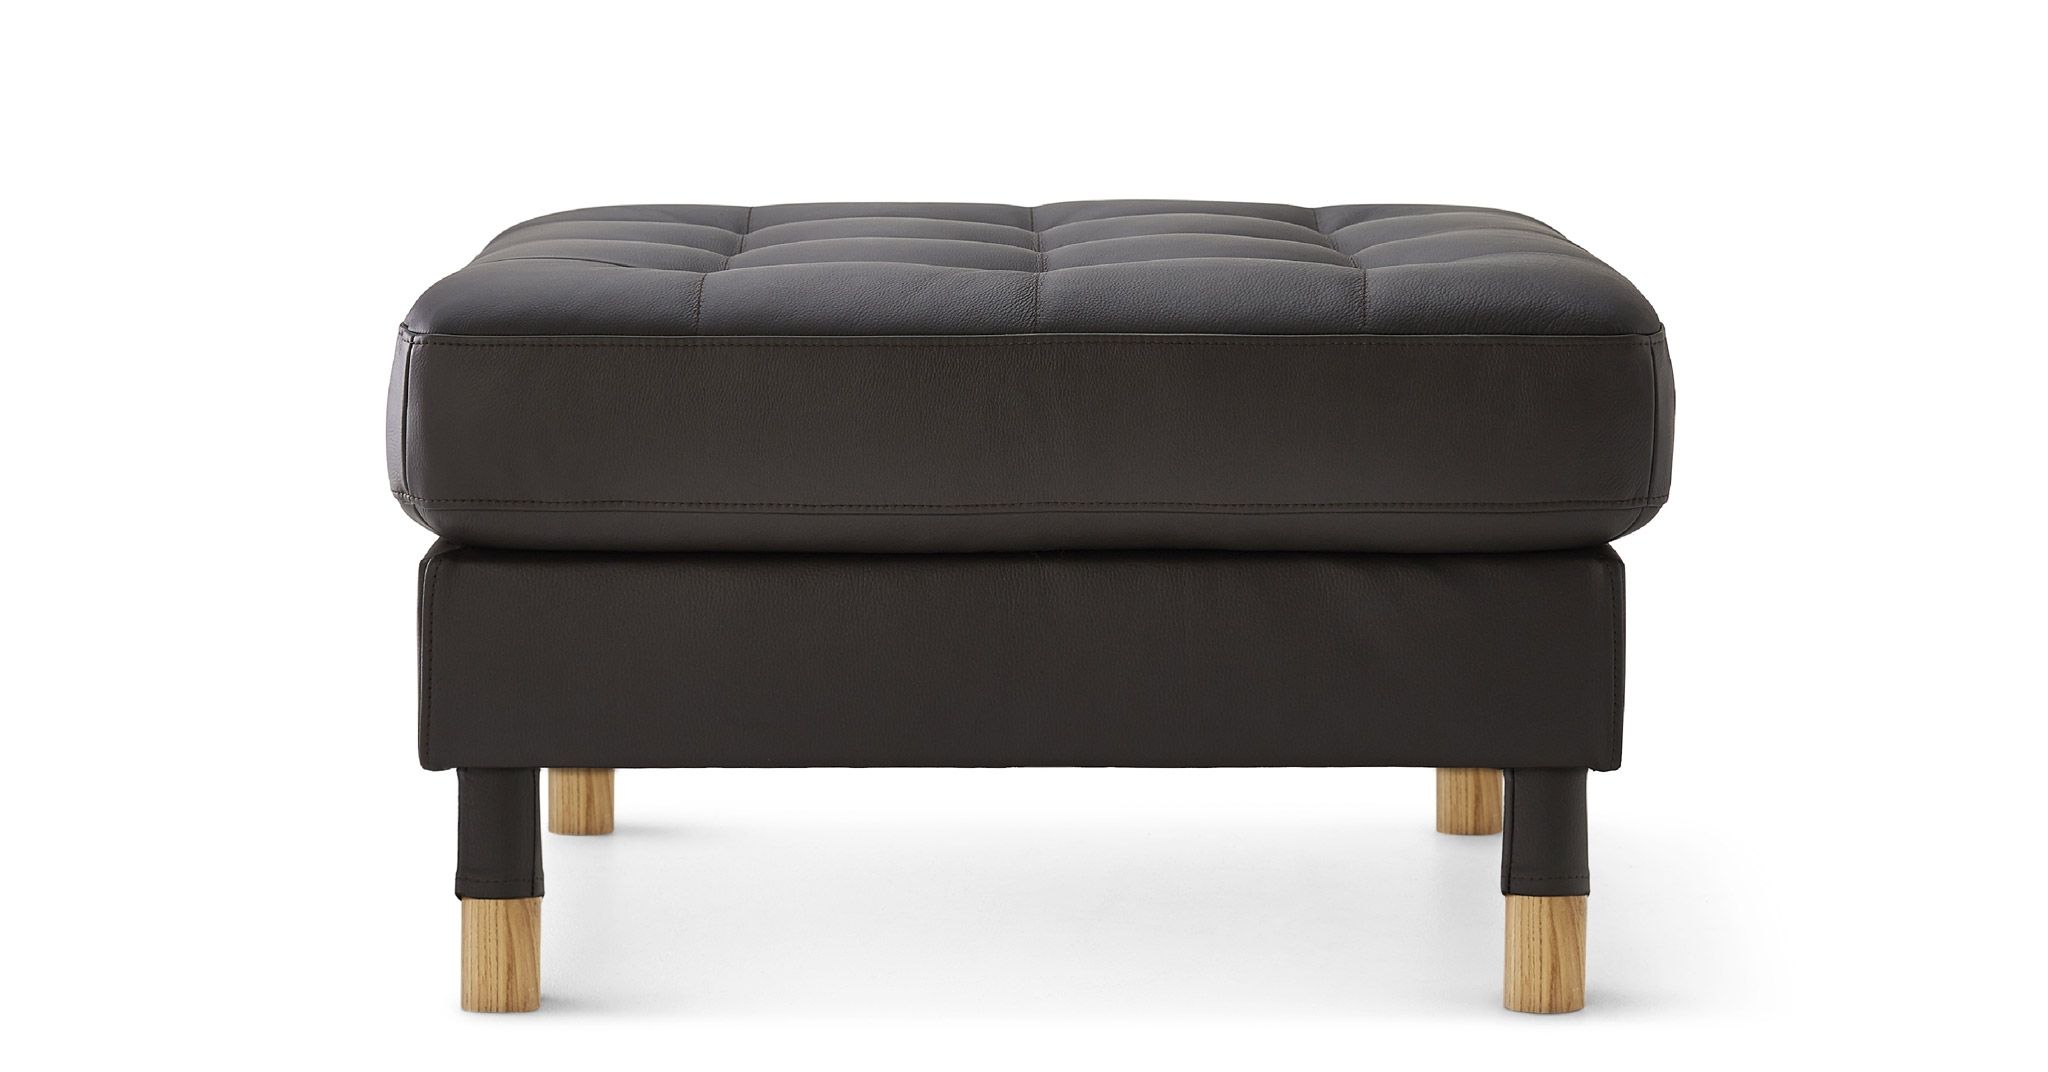 Leather Footstools Pouffes Ikea Ireland Intended For Footstools And Pouffes (View 14 of 15)